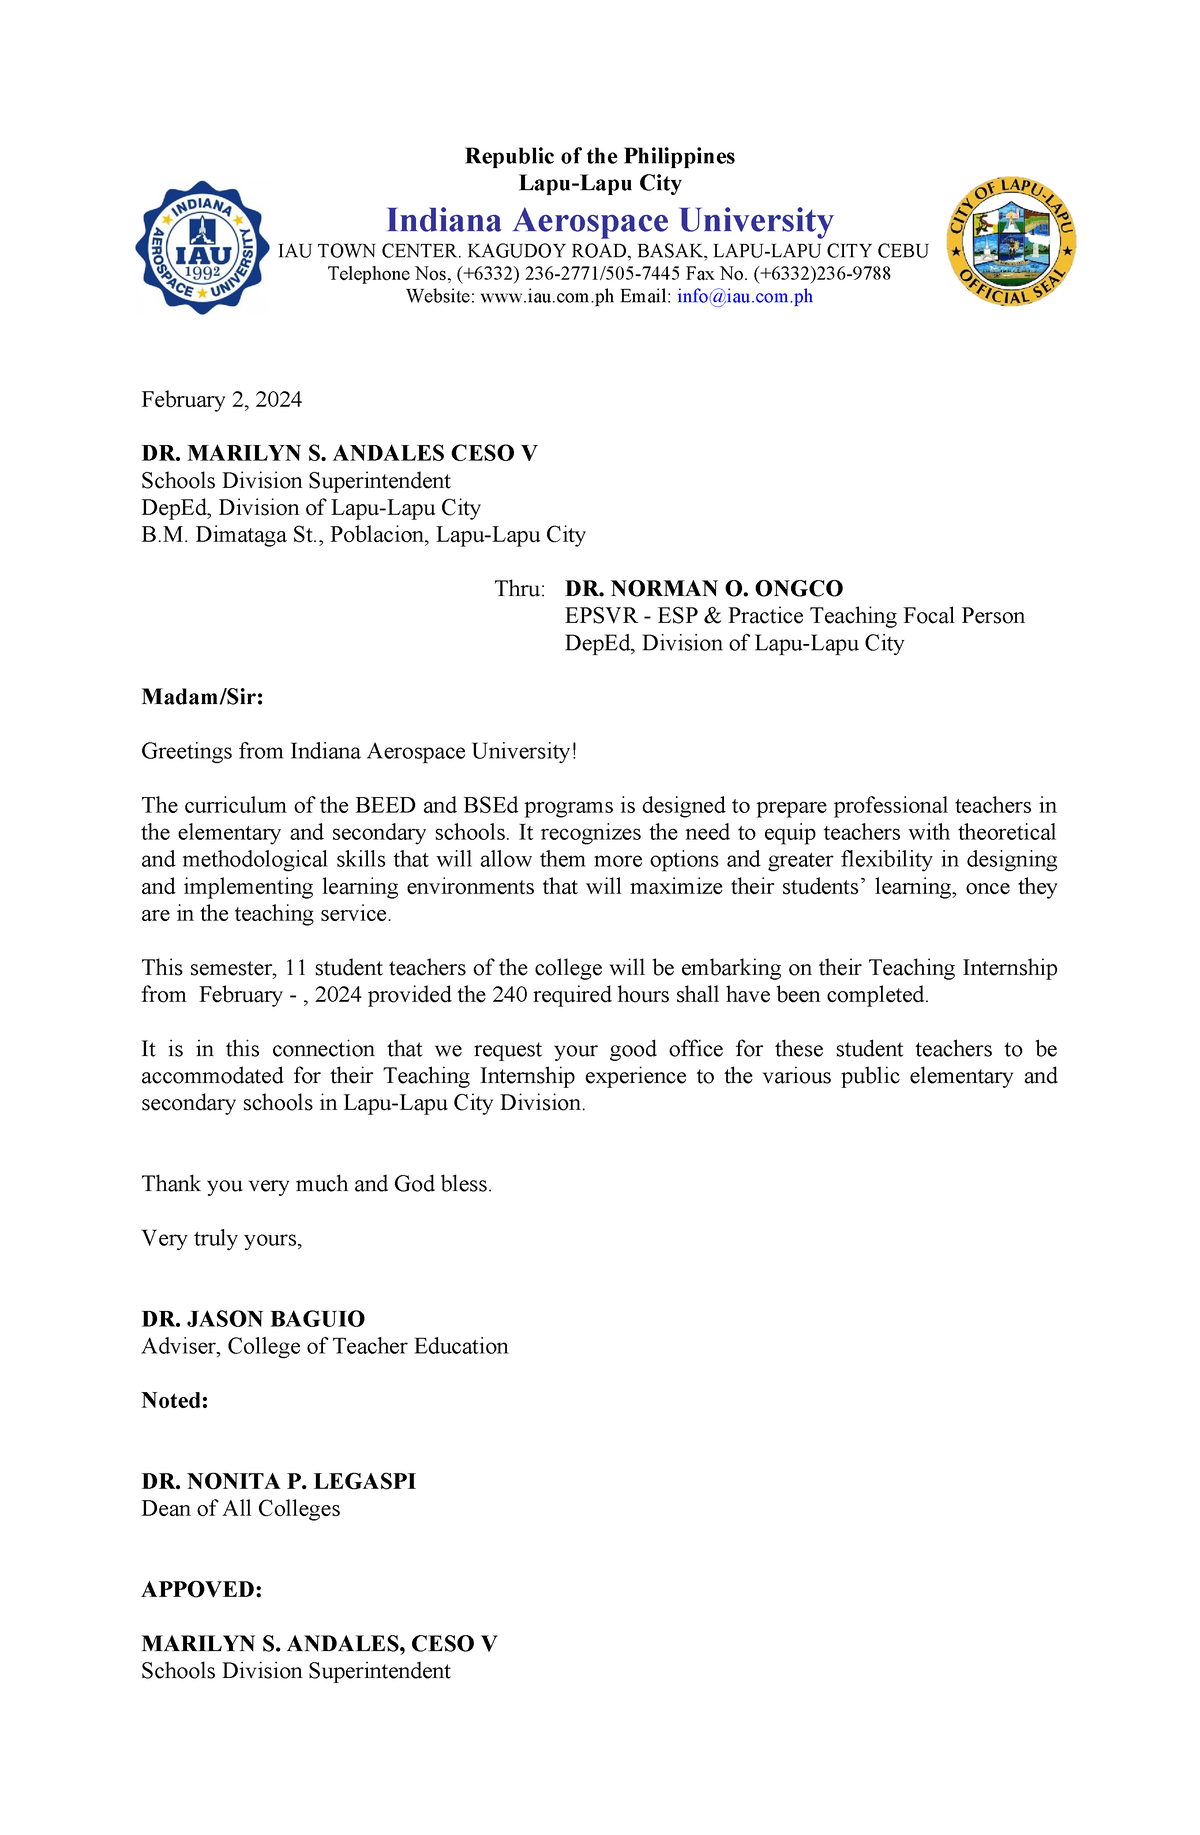 Edited Transmittal Letter TO THE Superintendent 2024 - Republic of the ...